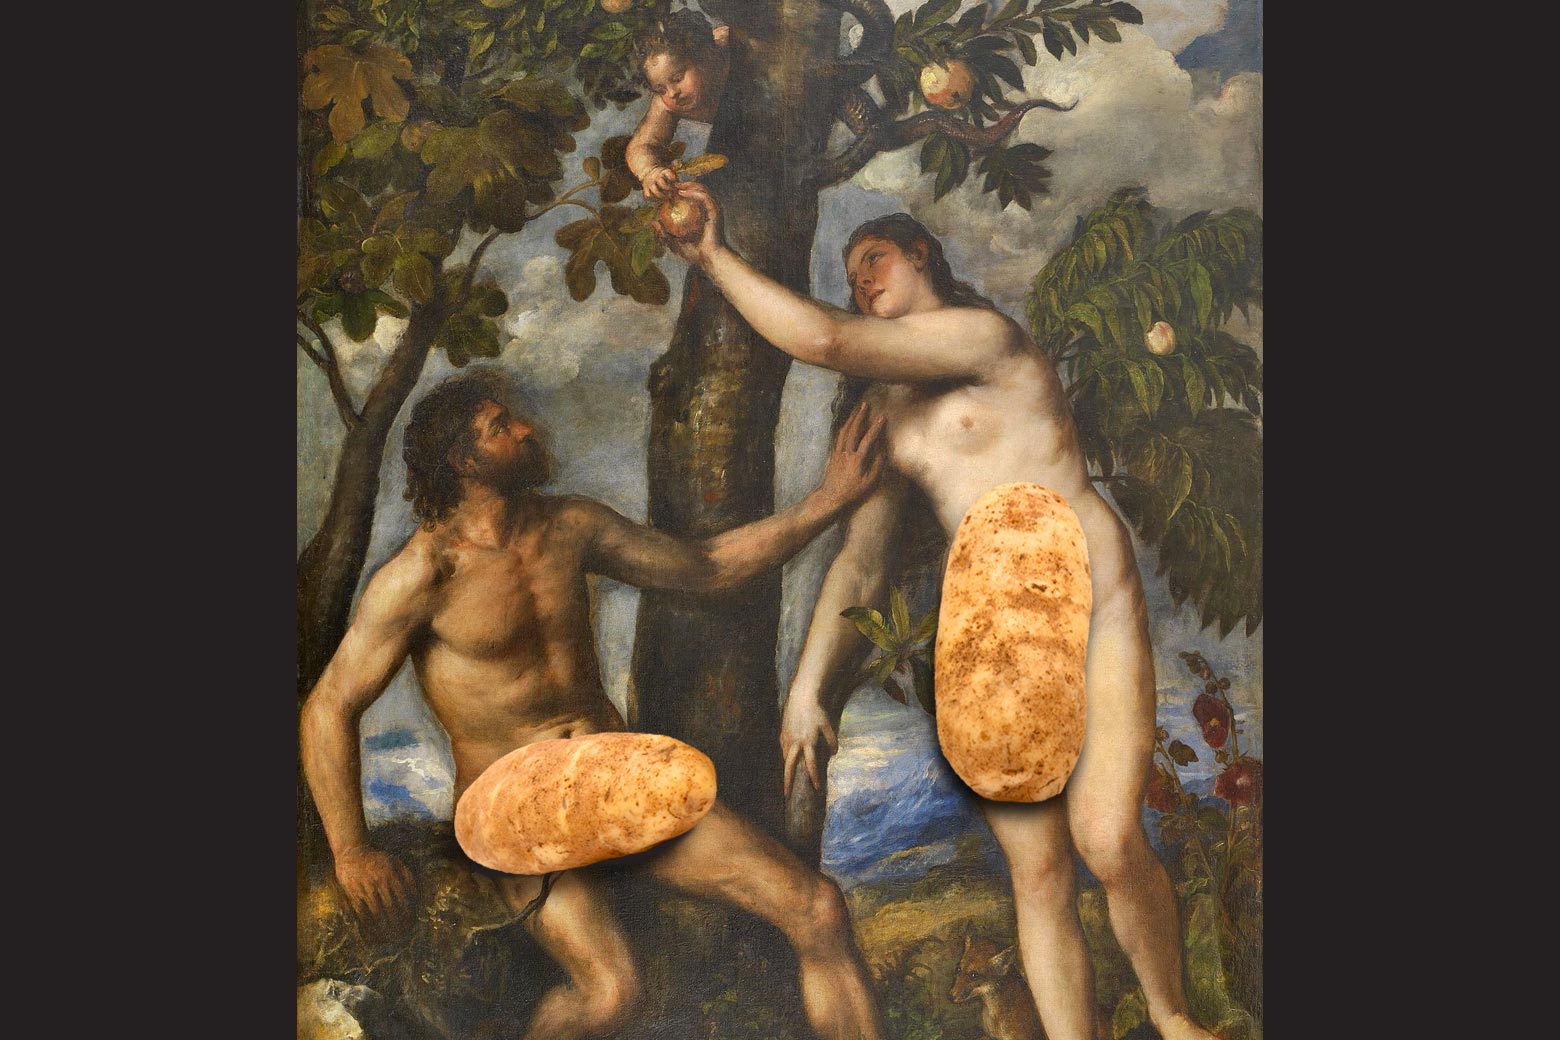 Titian's painting of Adam and Eve in the Garden of Eden is seen with large potatoes replacing the vines that shield their genitals in the original.